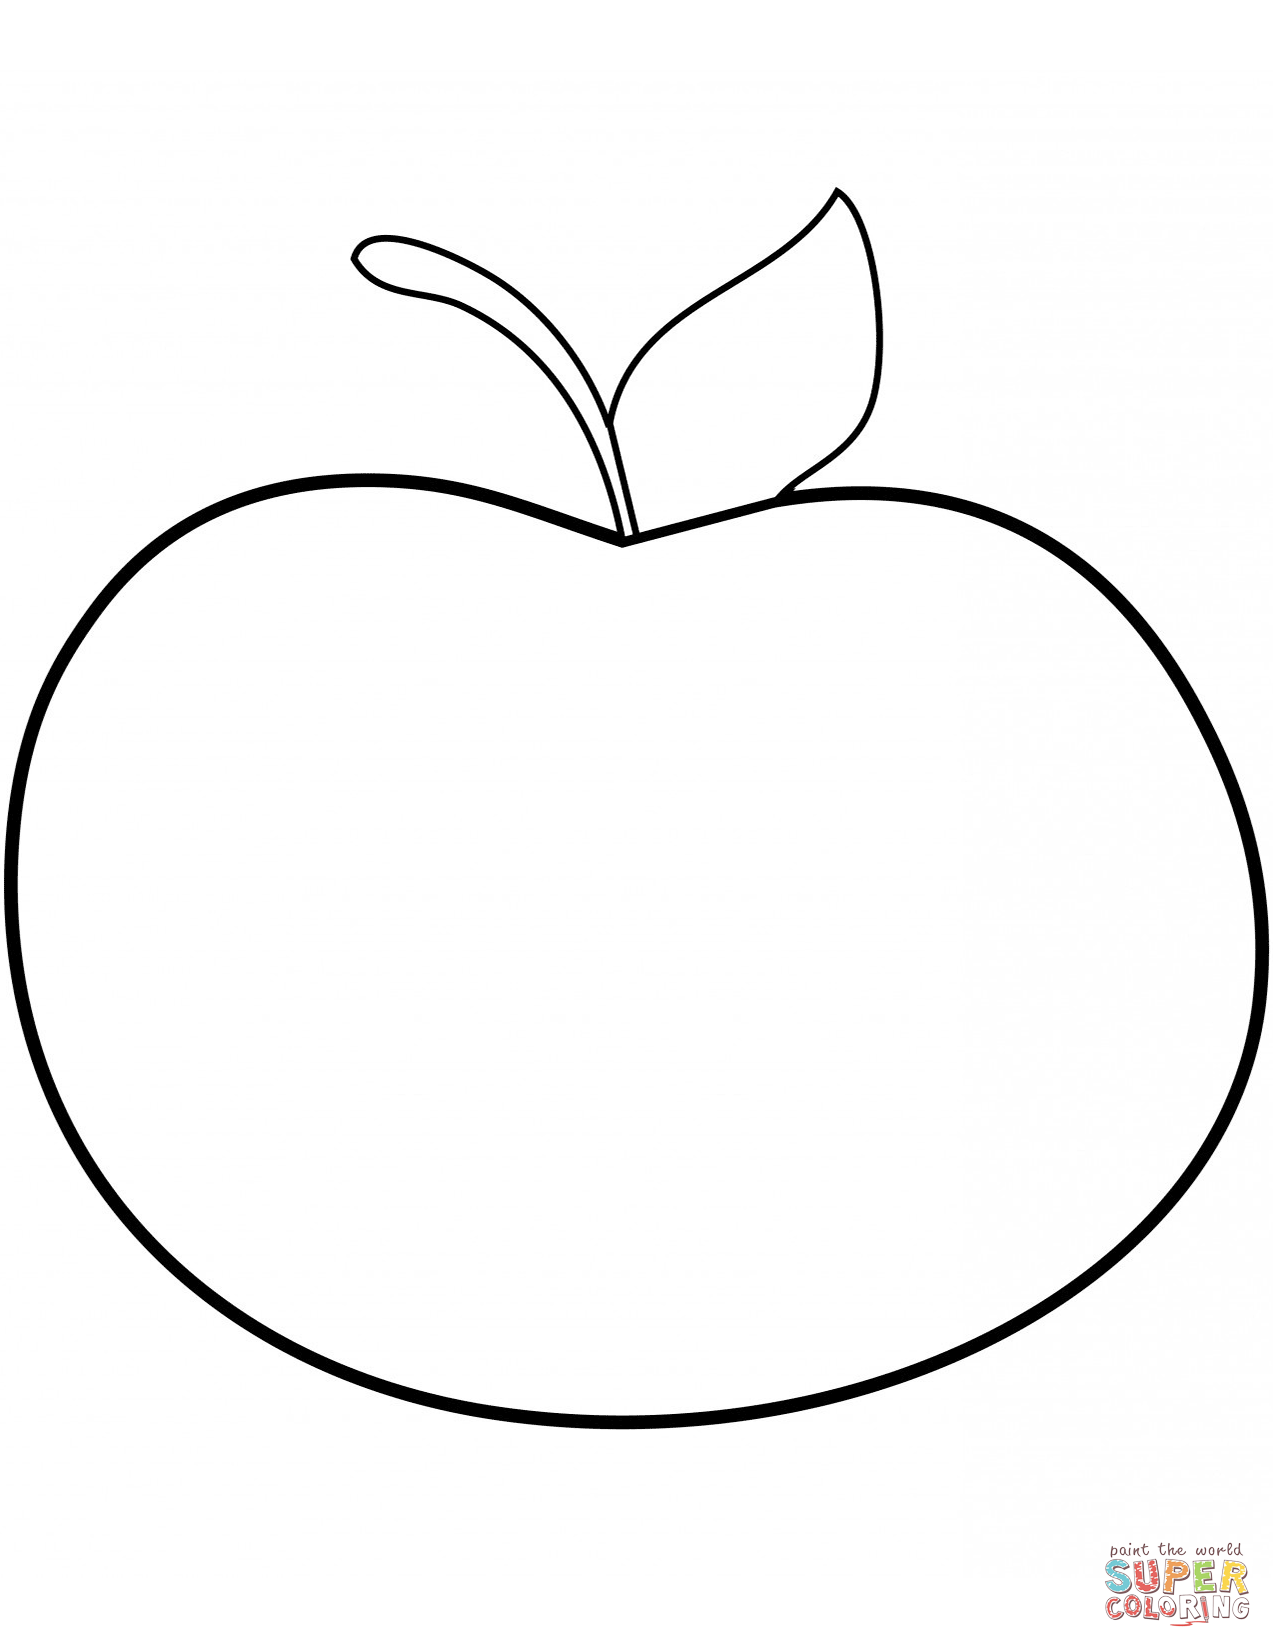 Apples coloring pages | Free Coloring Pages